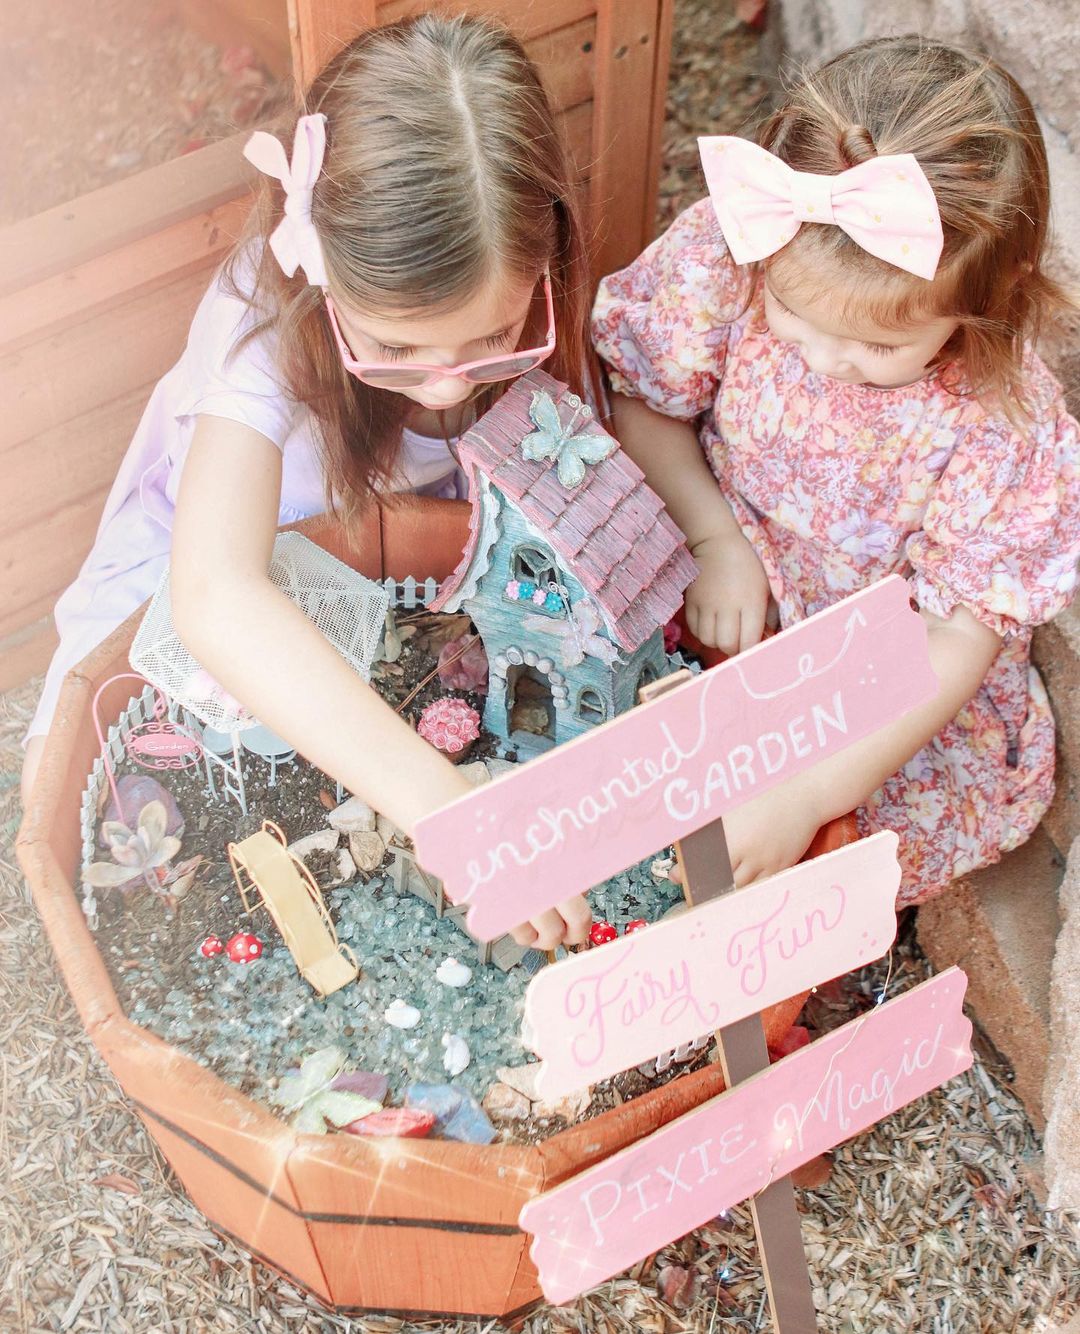 Children designing a fairy garden with small trinkets and pink accents. Photo by Instagram user @heidiliz